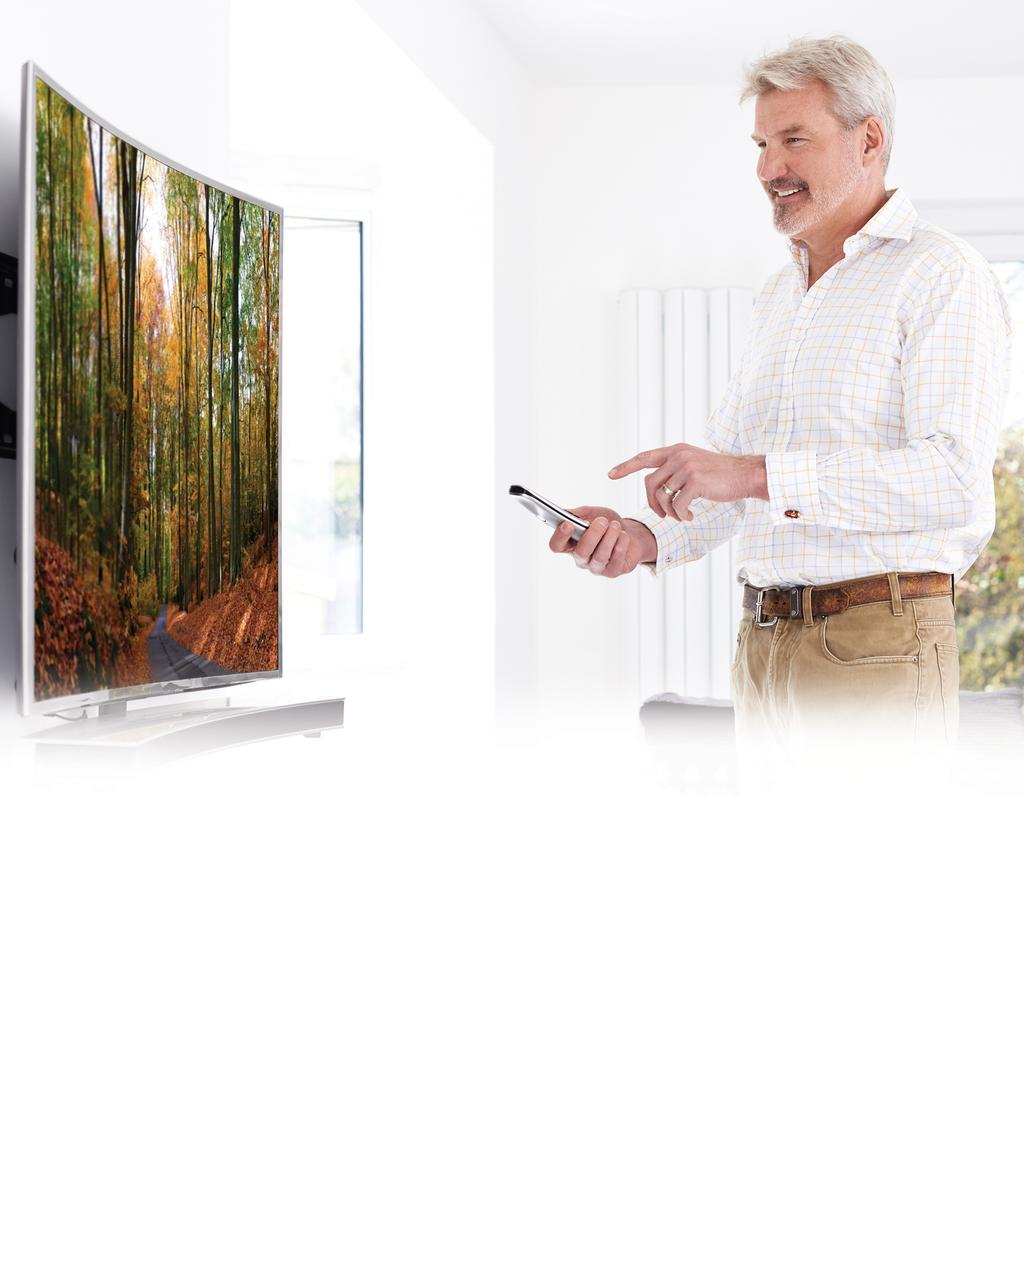 4K TV: 4K TV (also known as Ultra HD) has four times the picture resolution of high-def (HD) sets.